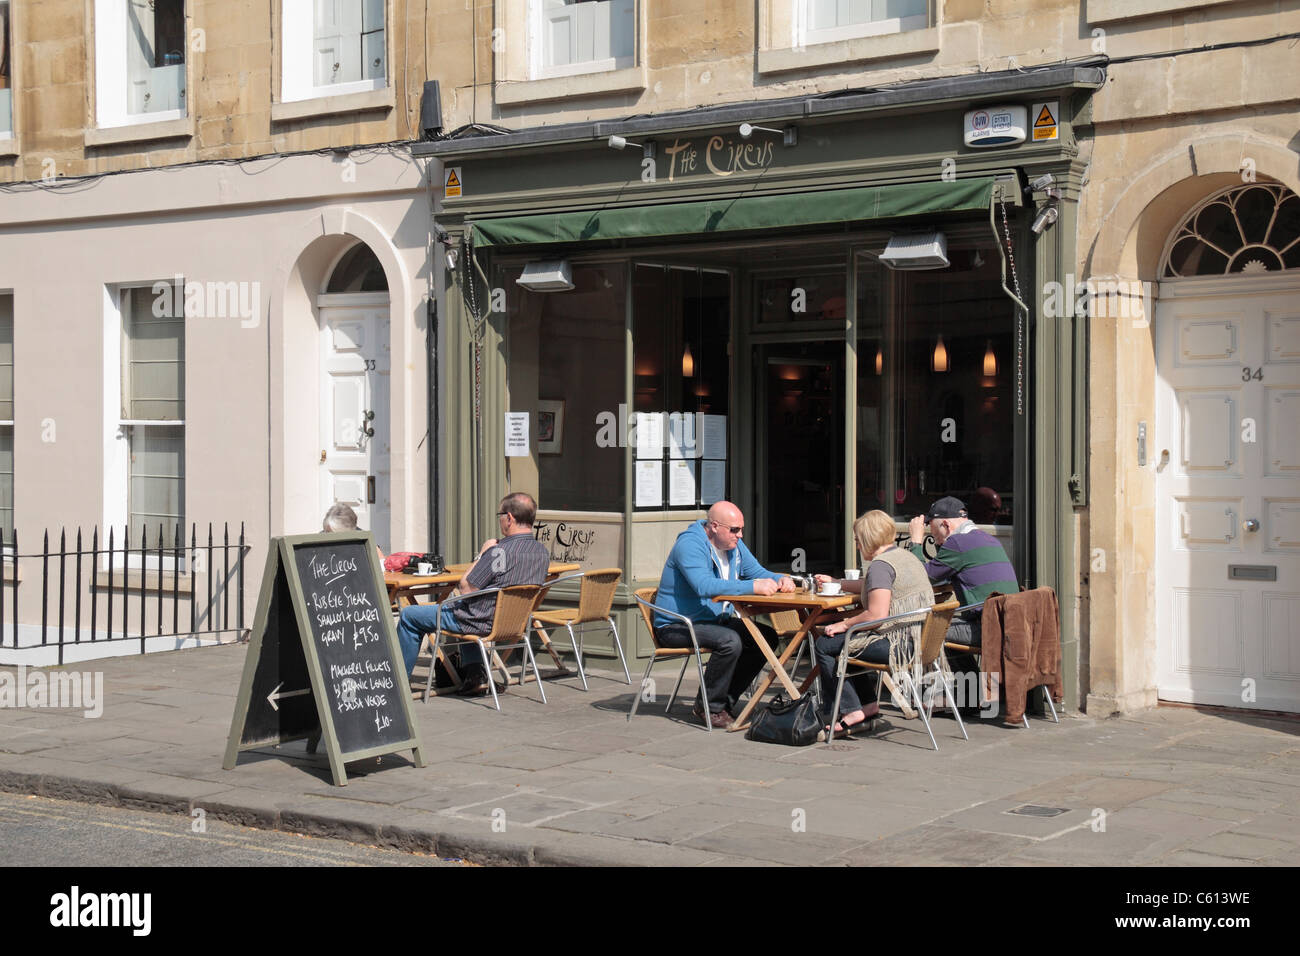 A small street side cafe (The Circus) with external tables on Brook ...